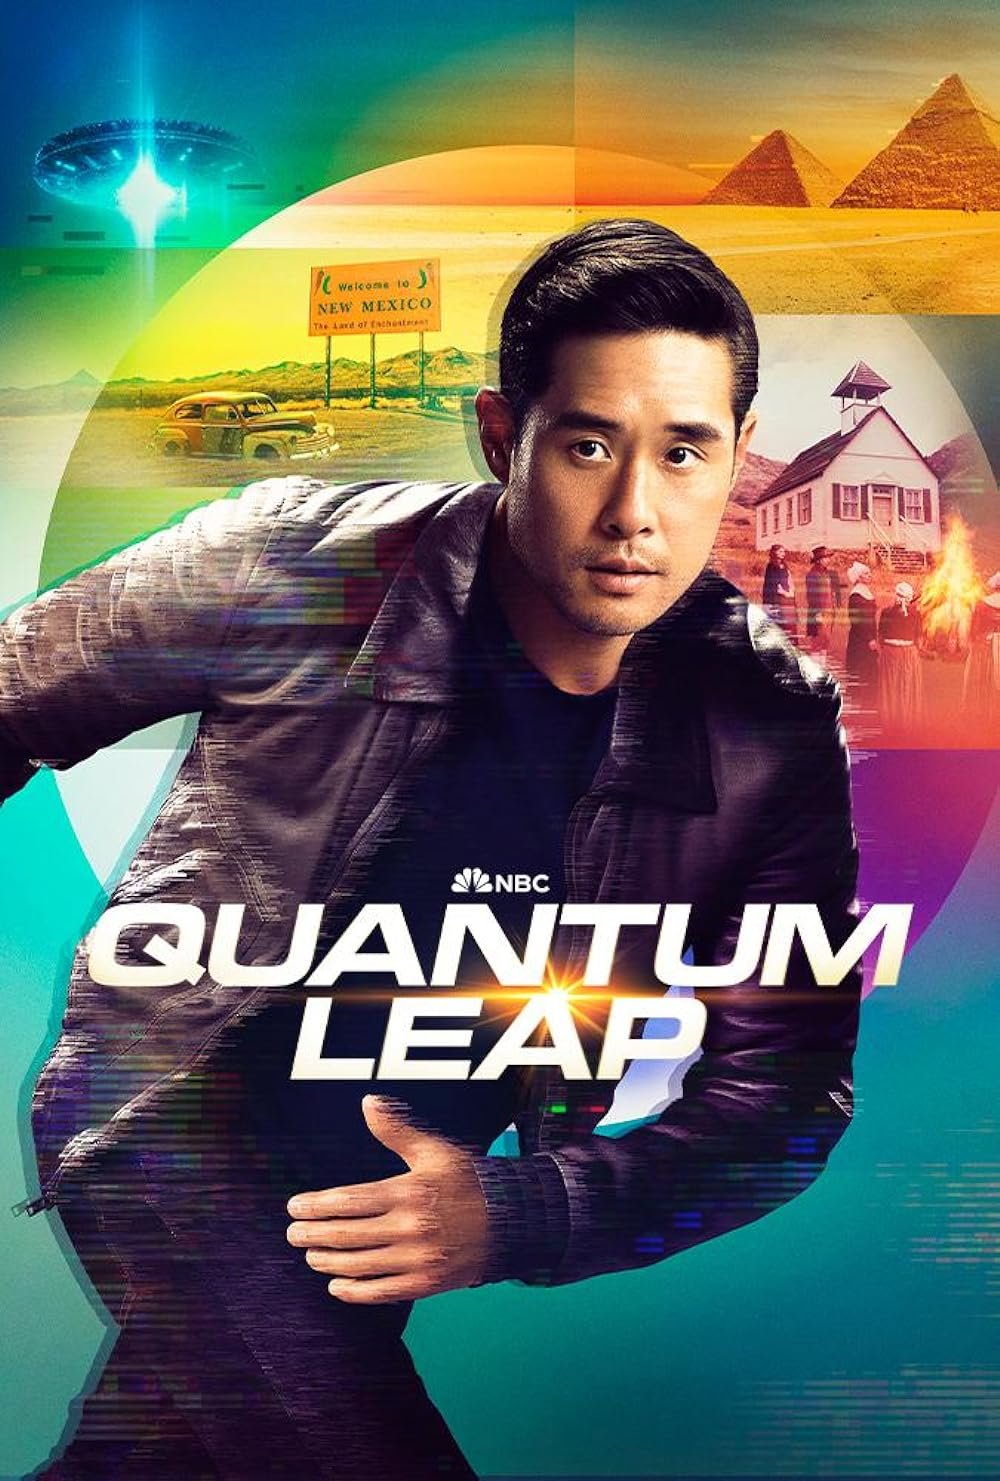 A New Chapter in Quantum Leap’s Legacy